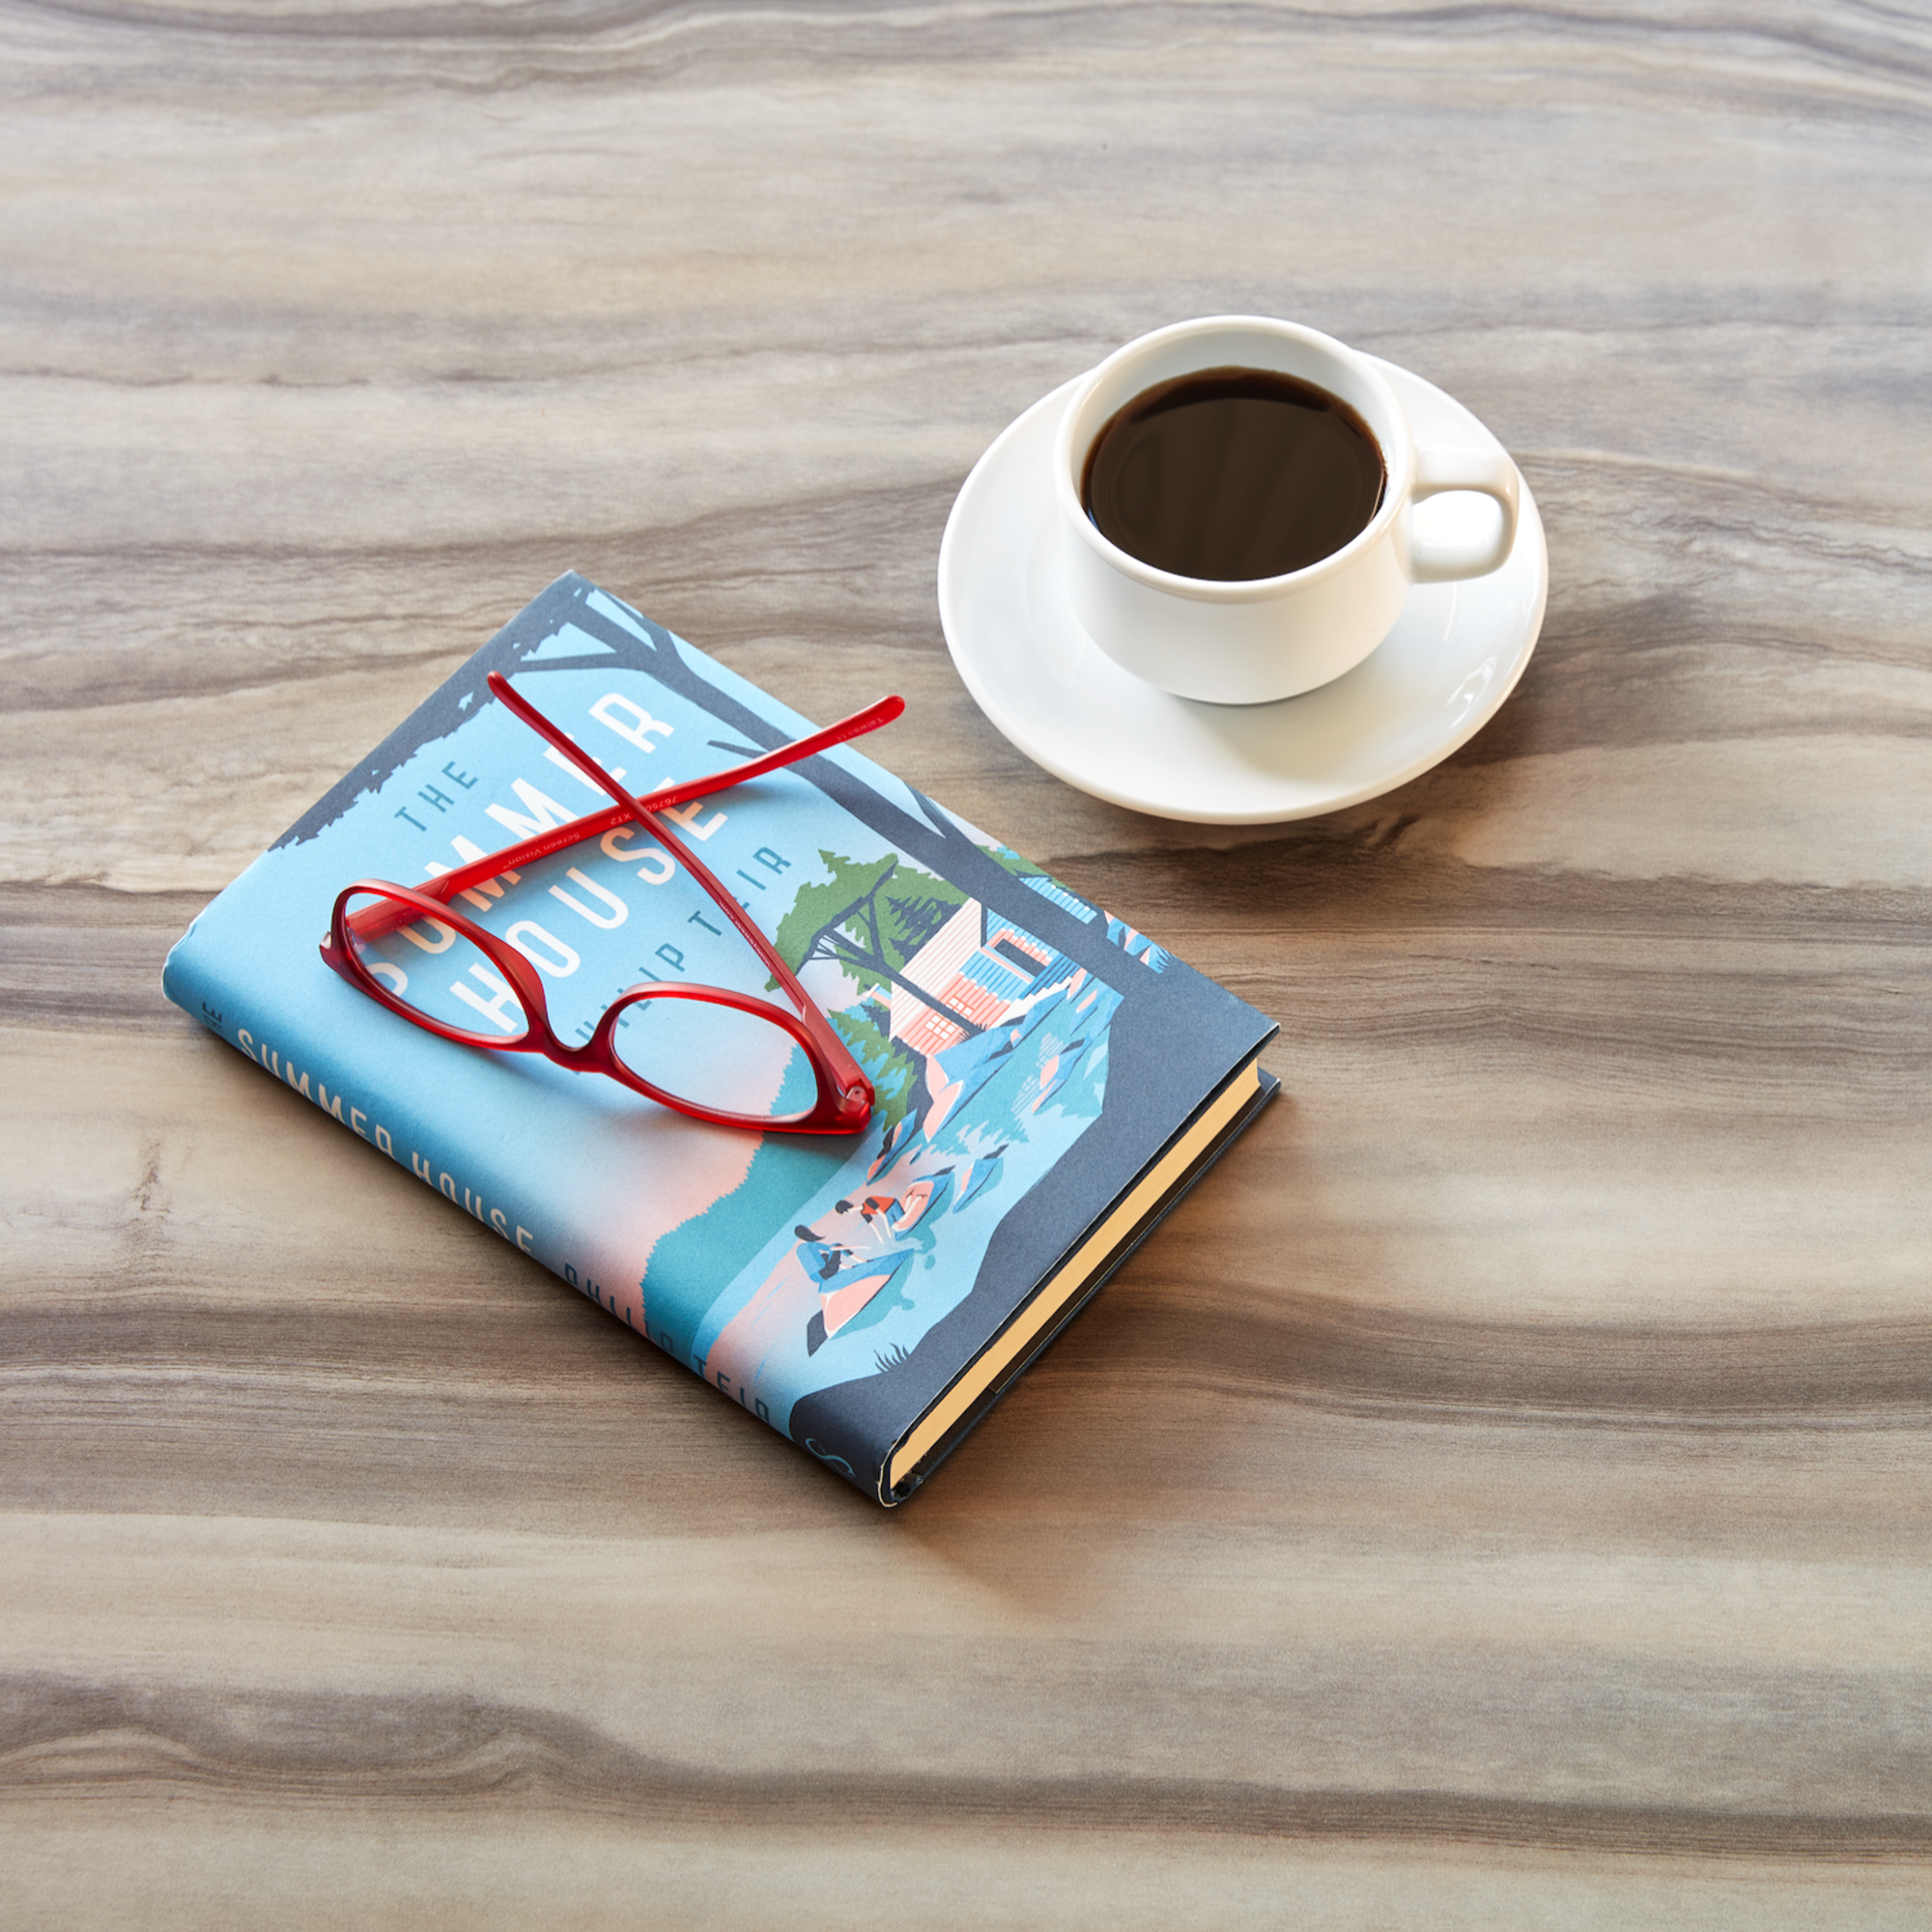 Formica® Living Impressions™ Residental Laminate Collection countertop with book and coffee